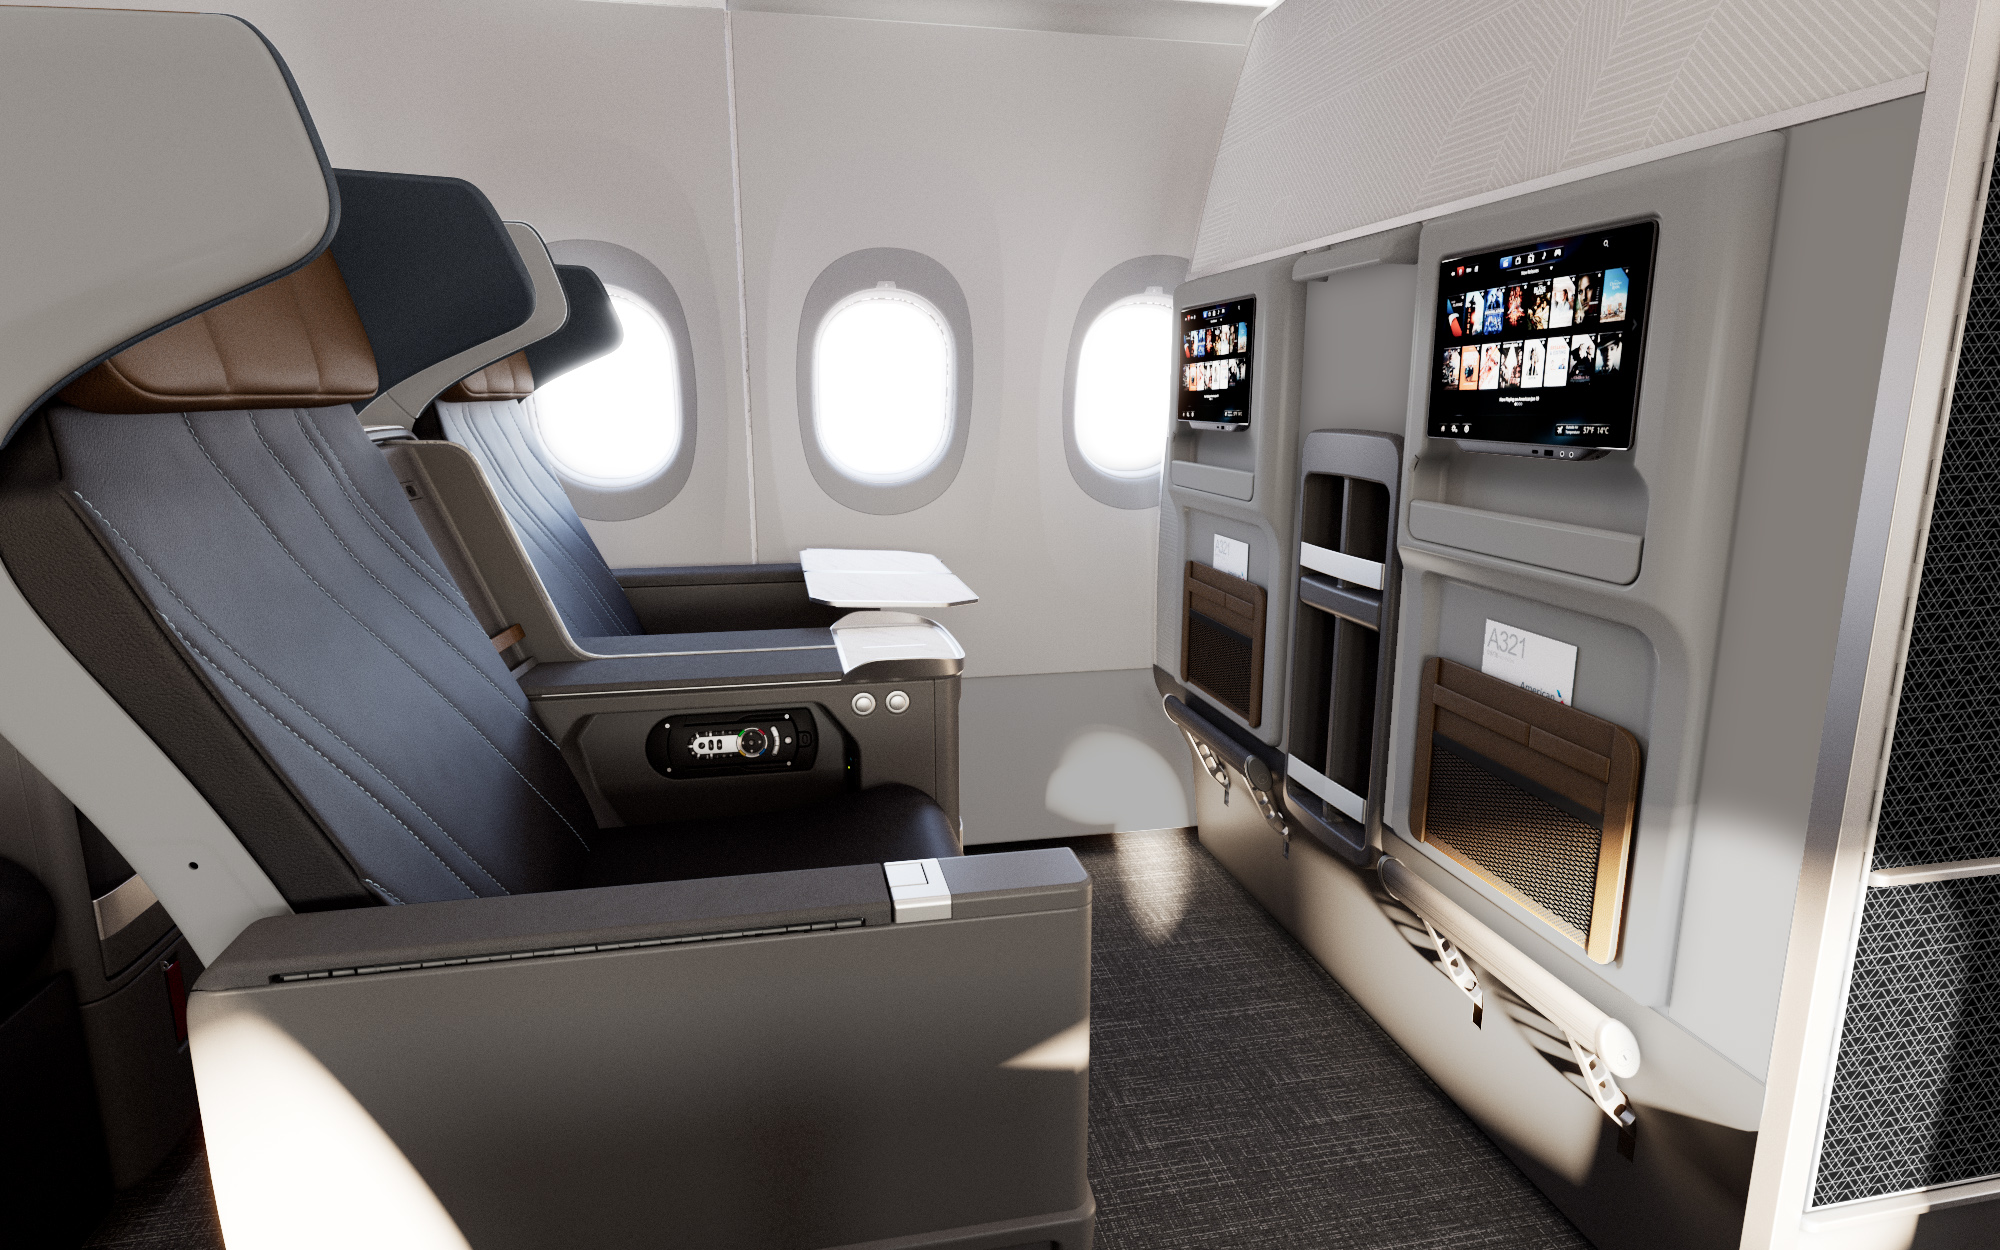 American Airlines will offer travellers a luxurious new ride with the 2024 arrival of its new Flagship Suites long-haul business class.